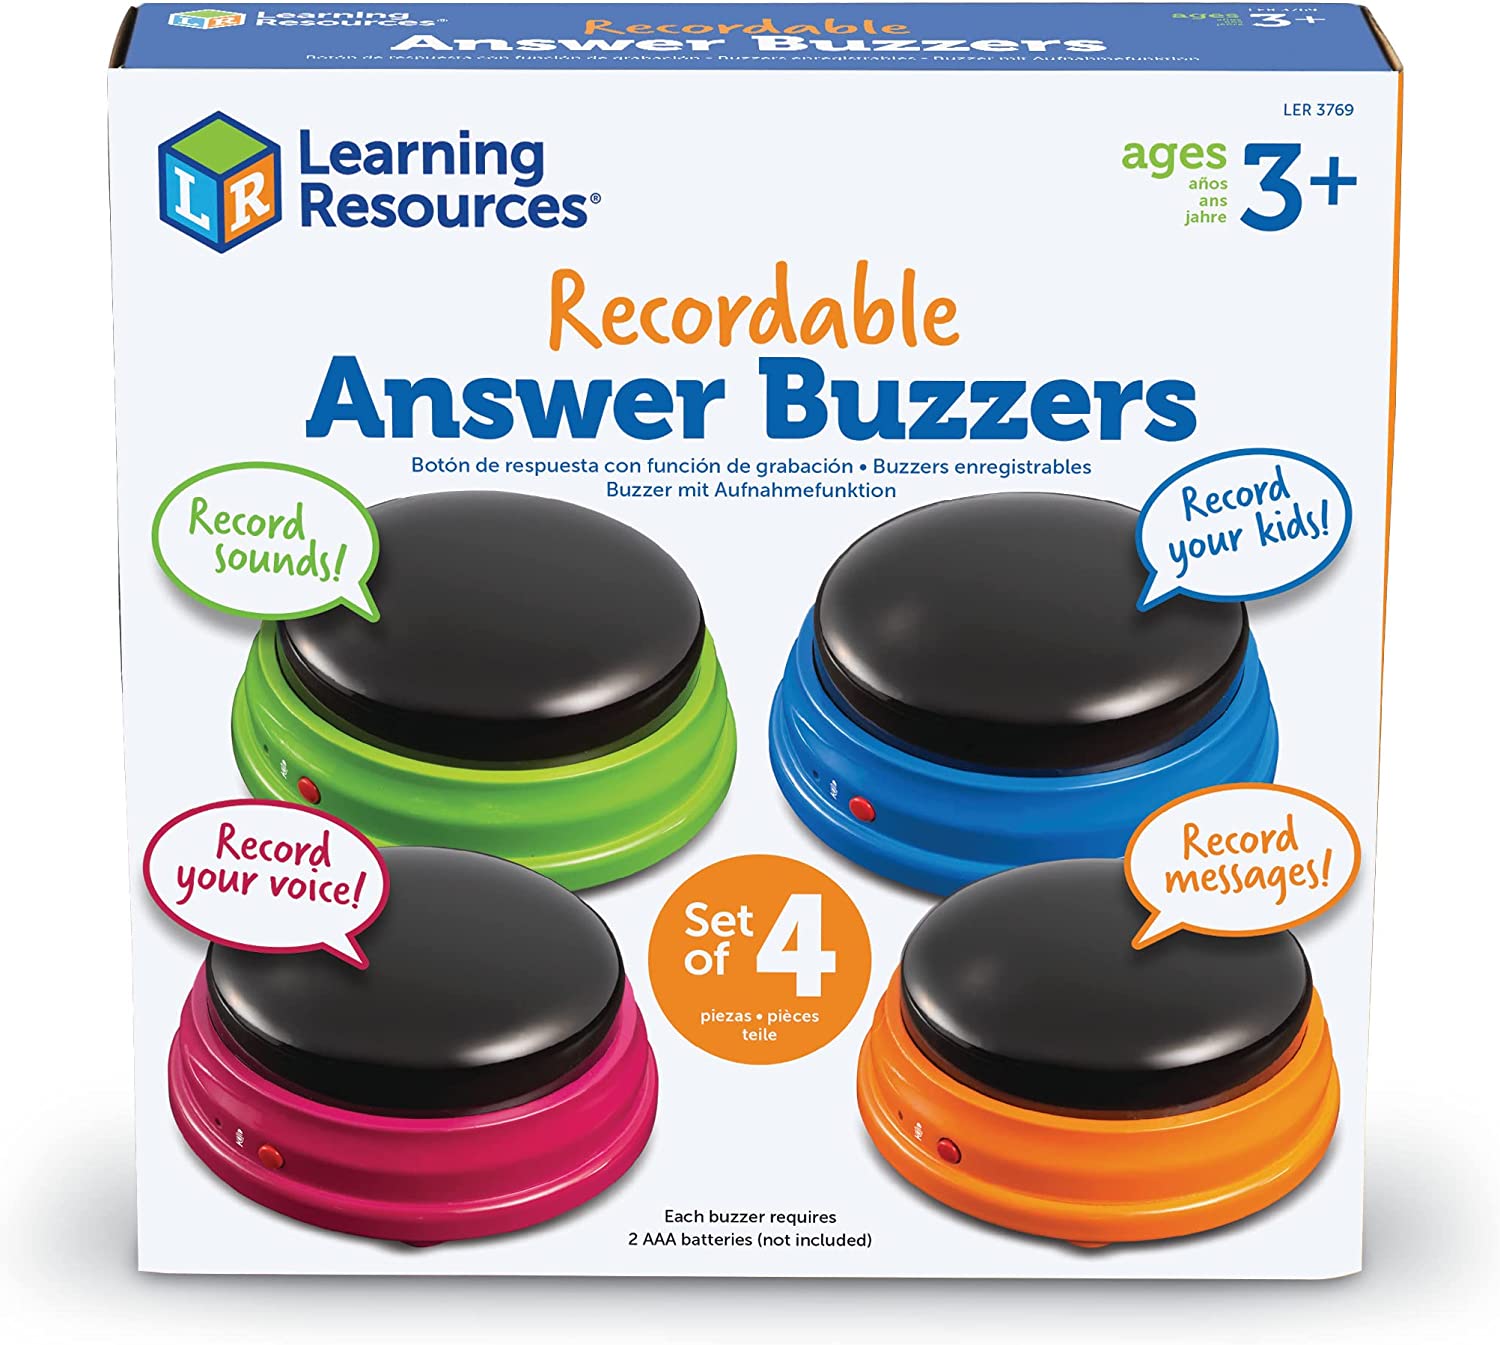 The product package for Recordable Answer Buzzers.